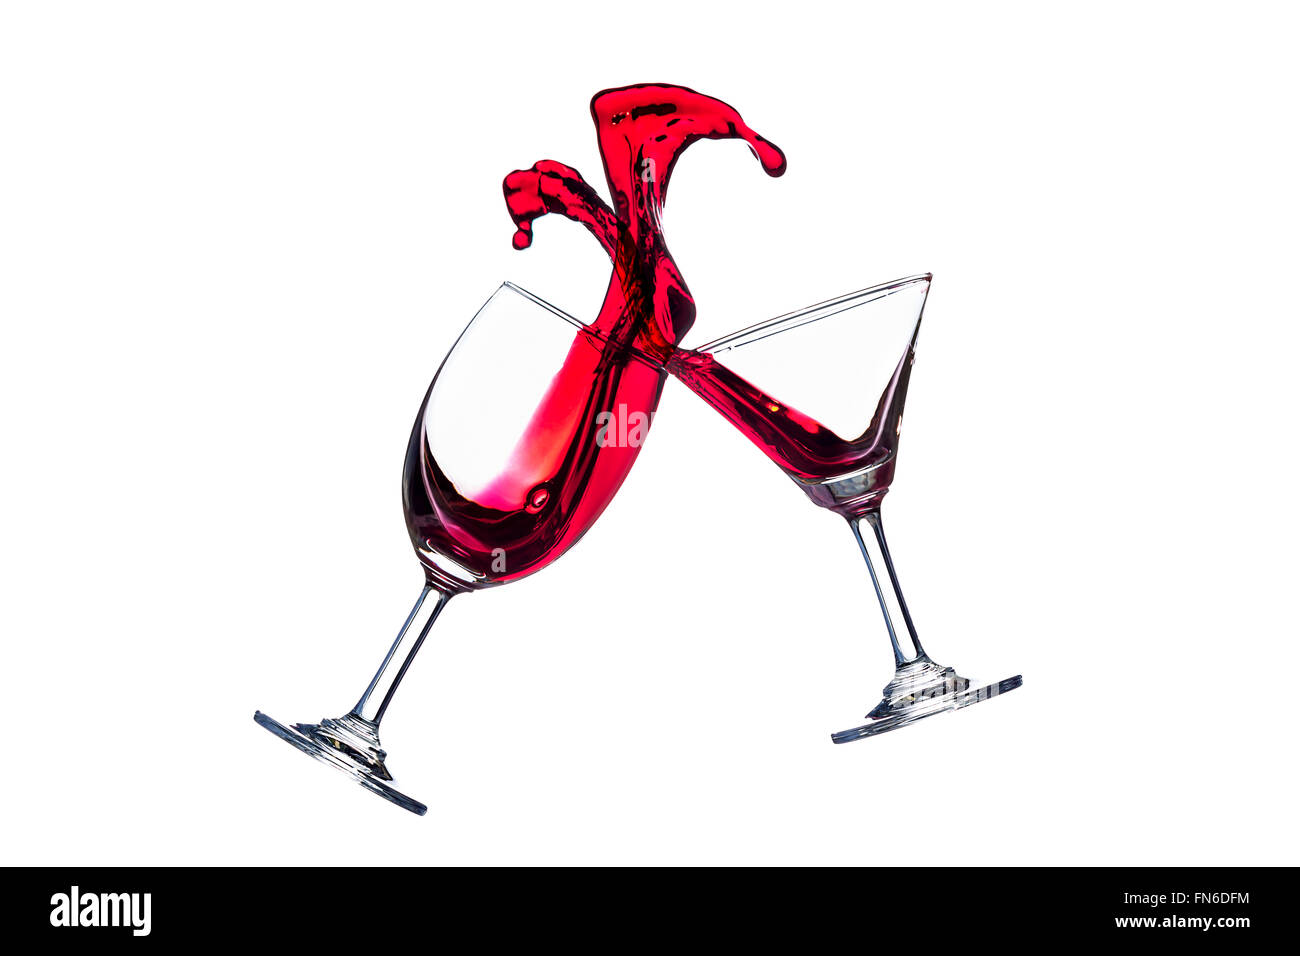 Clink red wine glasses on isolate white background Stock Photo